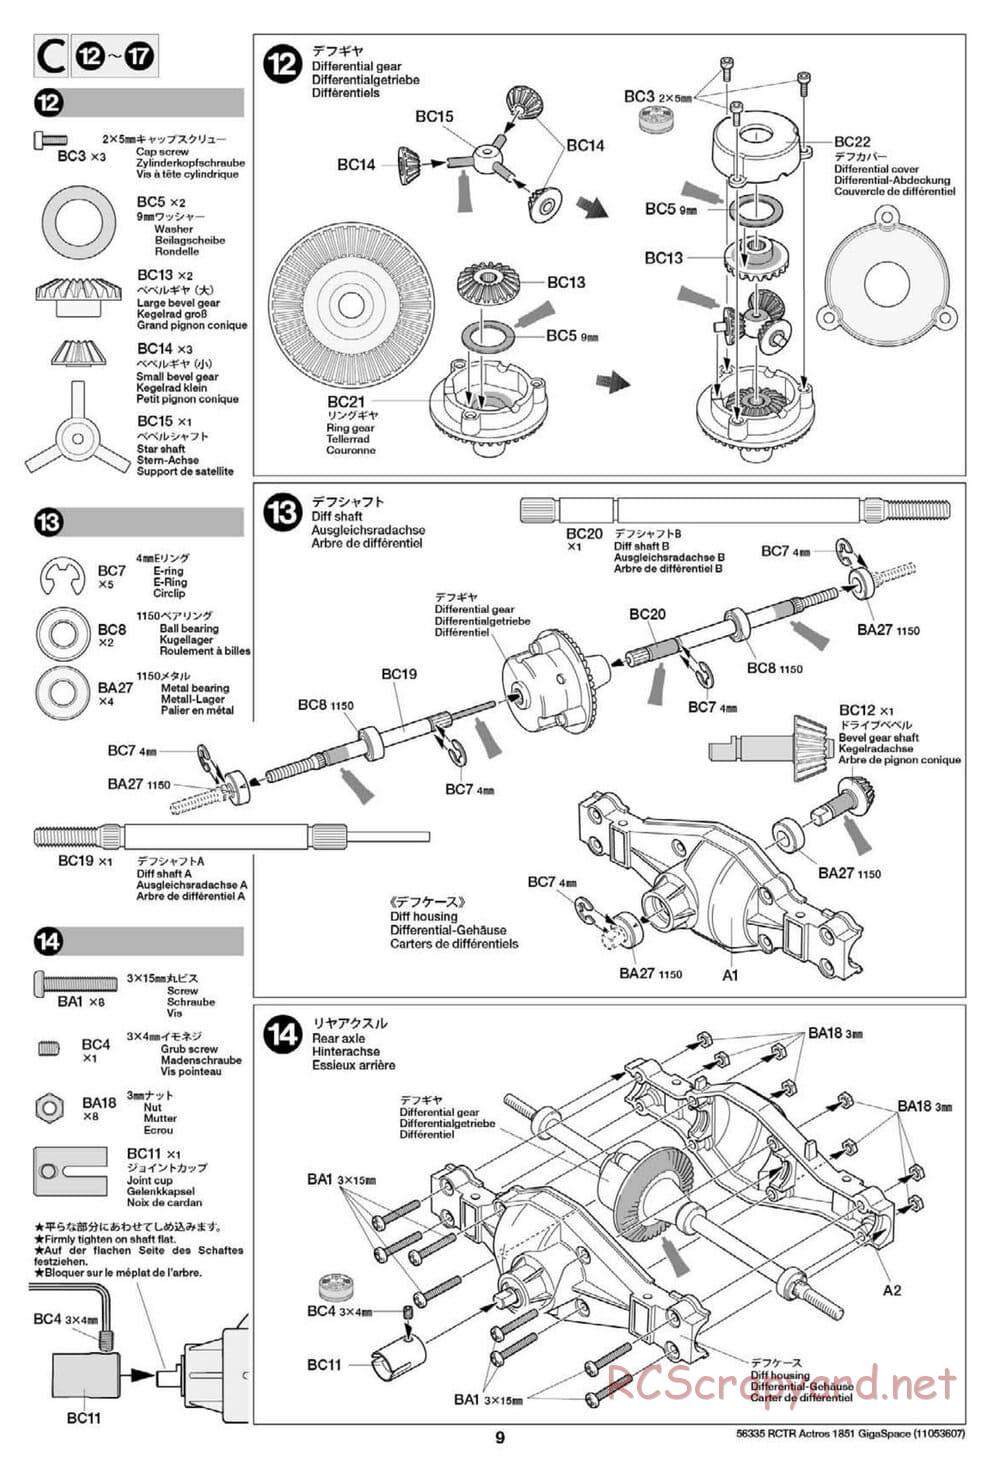 Tamiya - Mercedes-Benz Actros 1851 Gigaspace Tractor Truck Chassis - Manual - Page 9